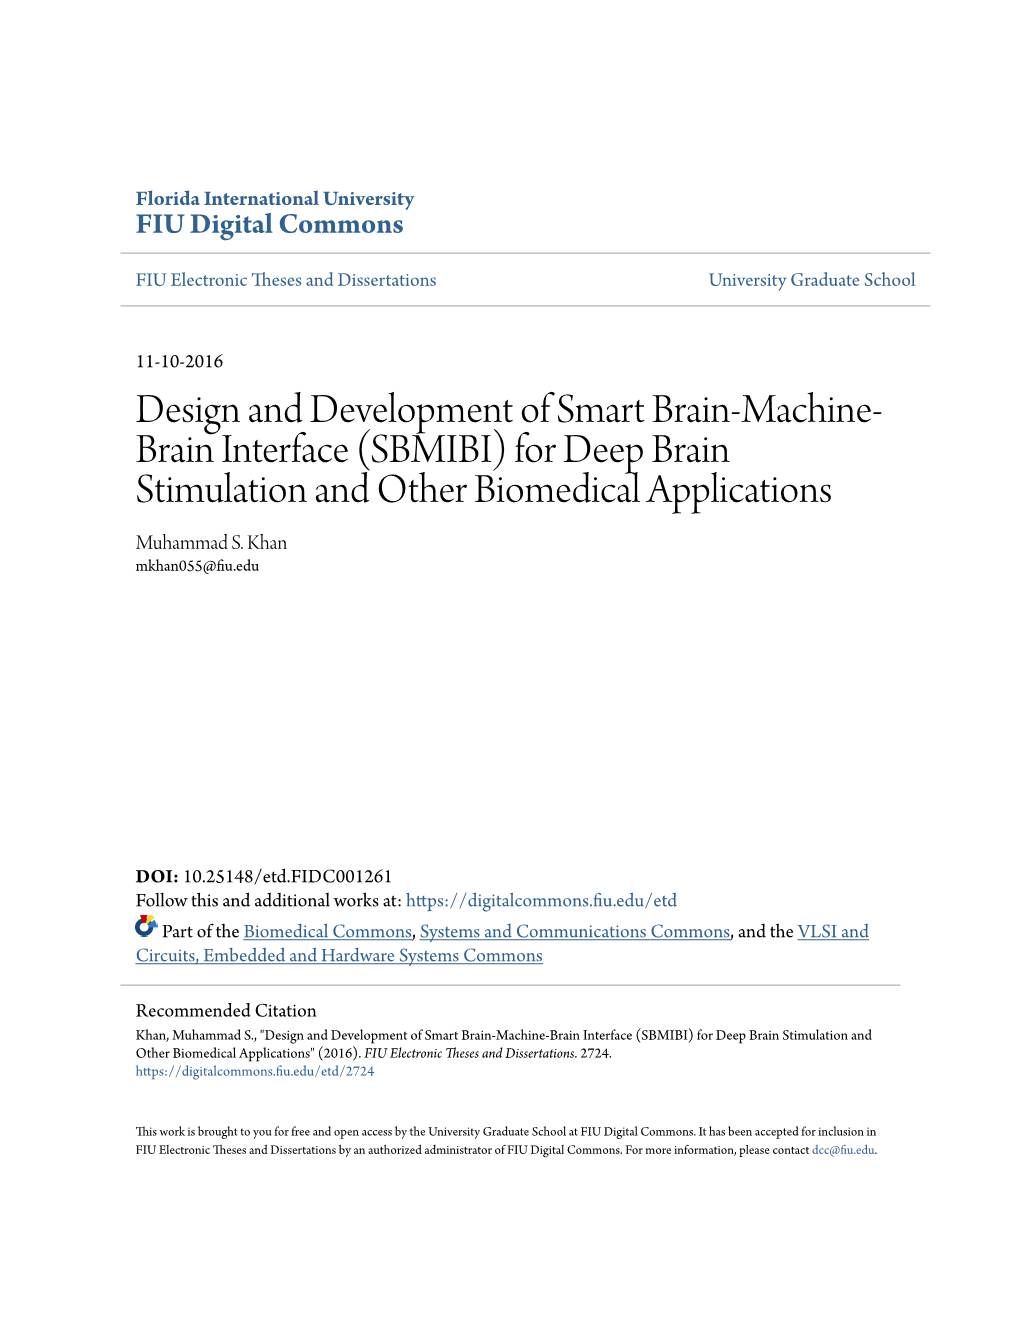 Design and Development of Smart Brain-Machine-Brain Interface (SBMIBI) for Deep Brain Stimulation and Other Biomedical Applications" (2016)